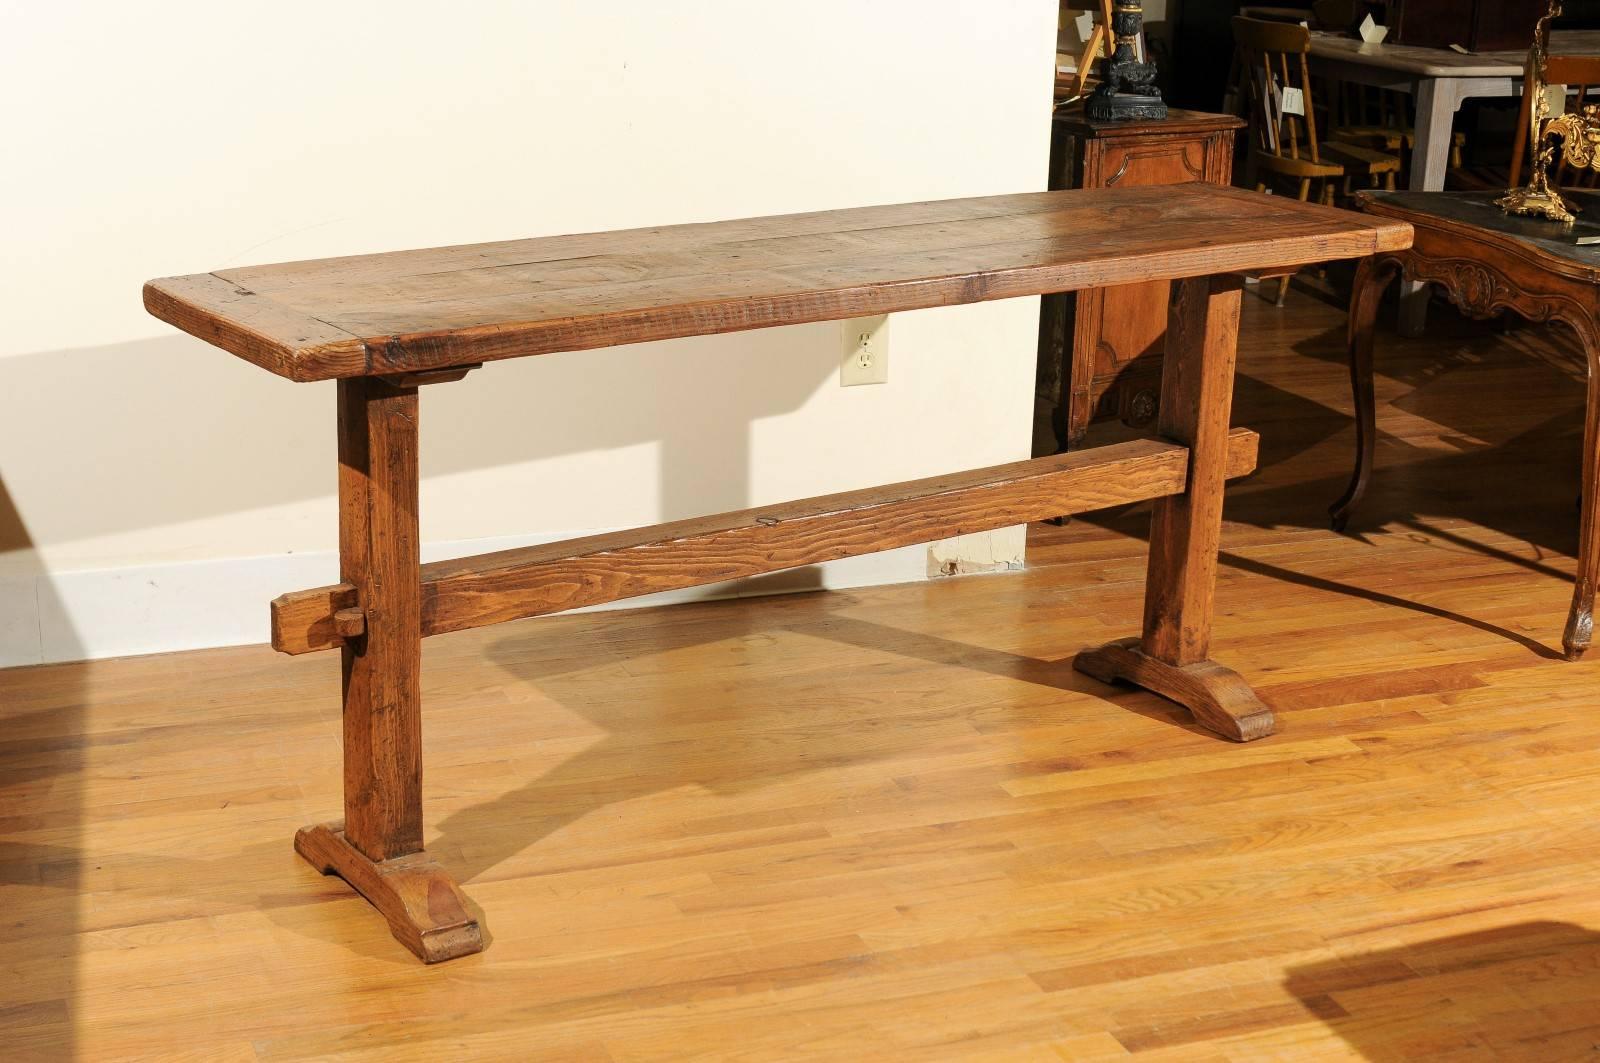 This is a handcrafted newly made table from antique wood. This server could be used behind a sofa, at the foot of a bed, on a screened in porch or many other locations. It is very sturdy.